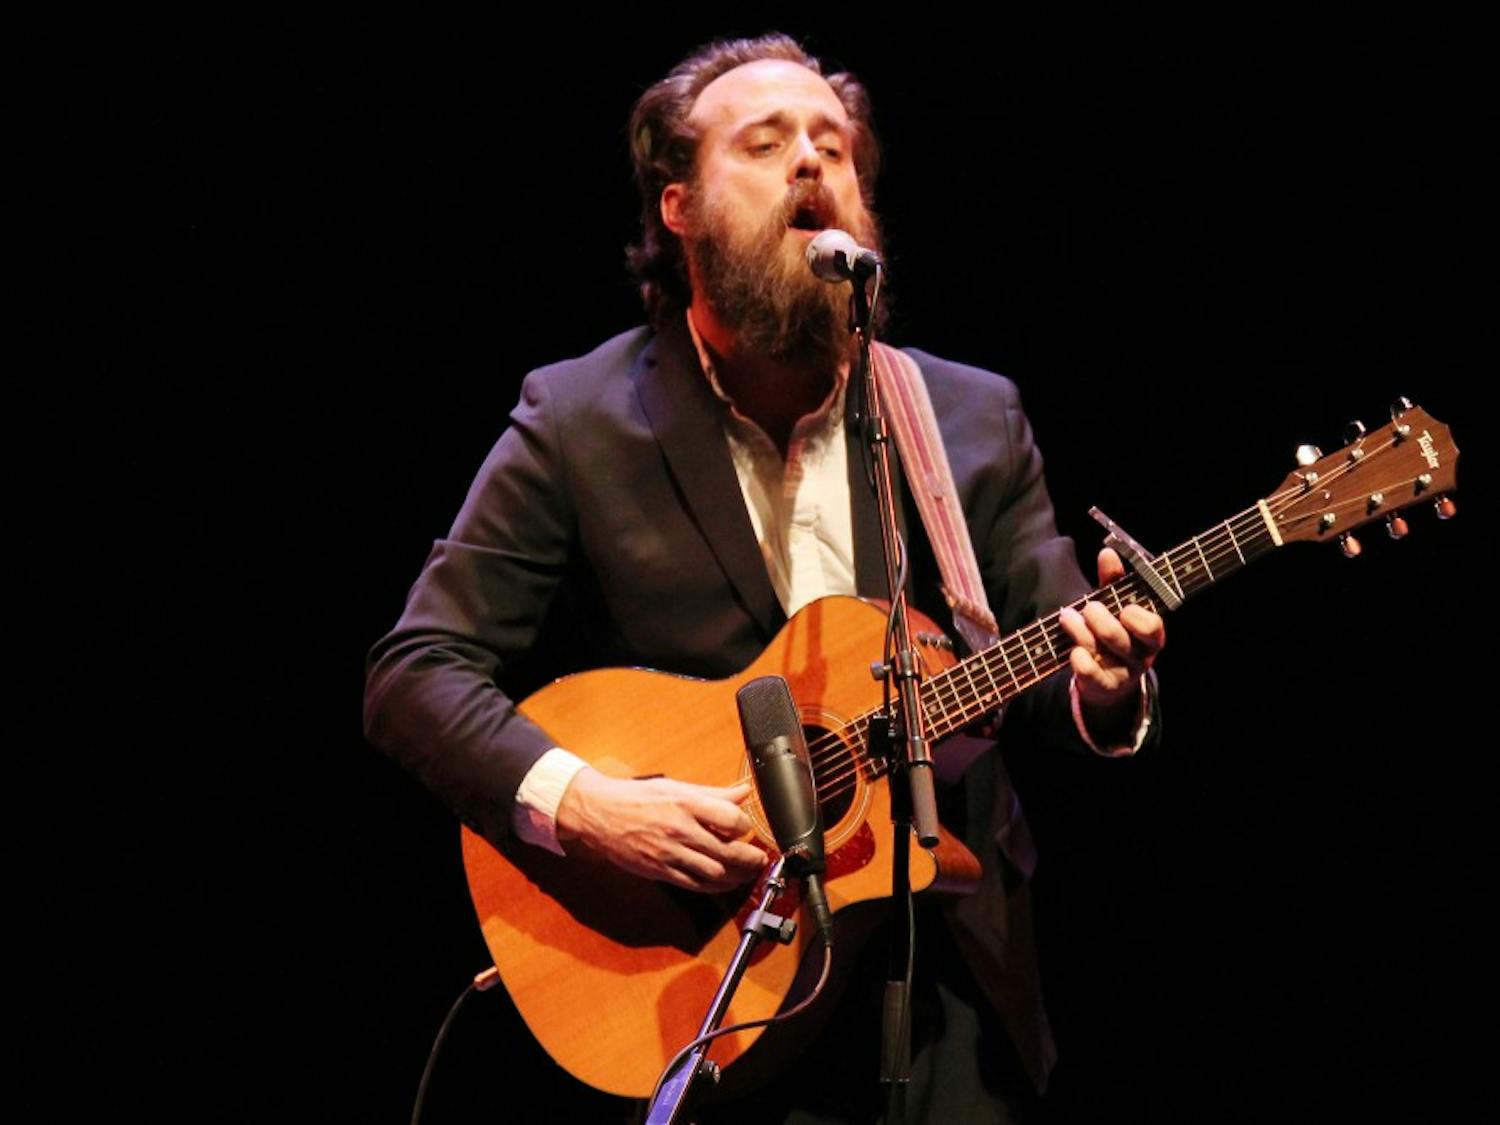 Iron and Wine played at Memorial Hall on Wednesday night. The Secret Sisters, a duo from Alabama, opened for him.